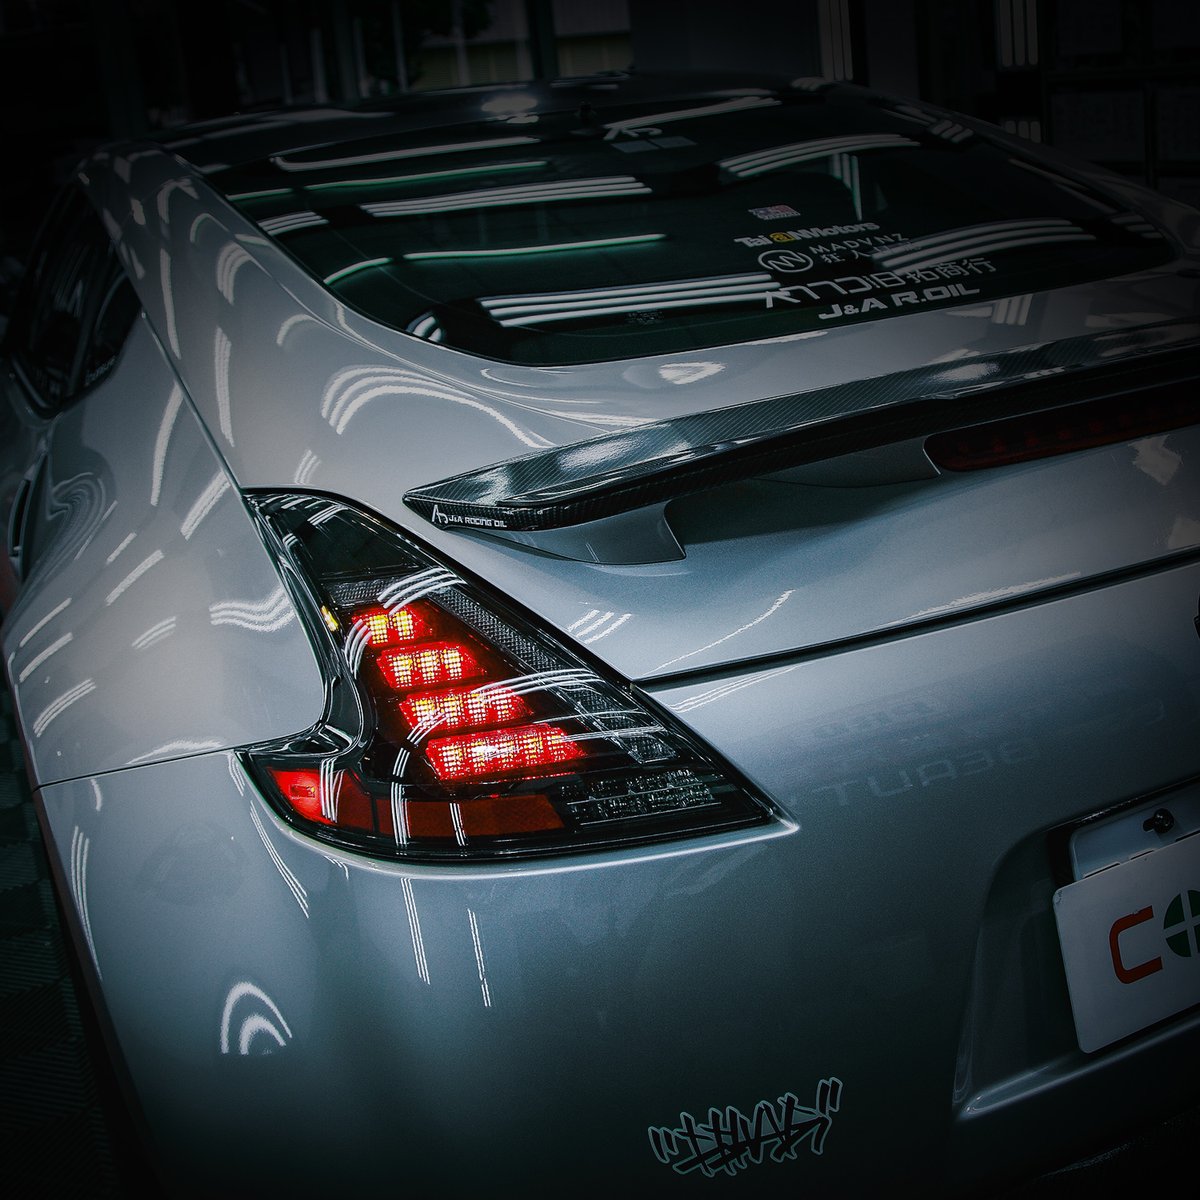 Dominate the Road with Style and Performance!
　　　　
#Nissan #370Z #Nissan370Z #fairlady #fairladyz #370z_life #zociety #aftermarket #taillight #taillights #COPLUS